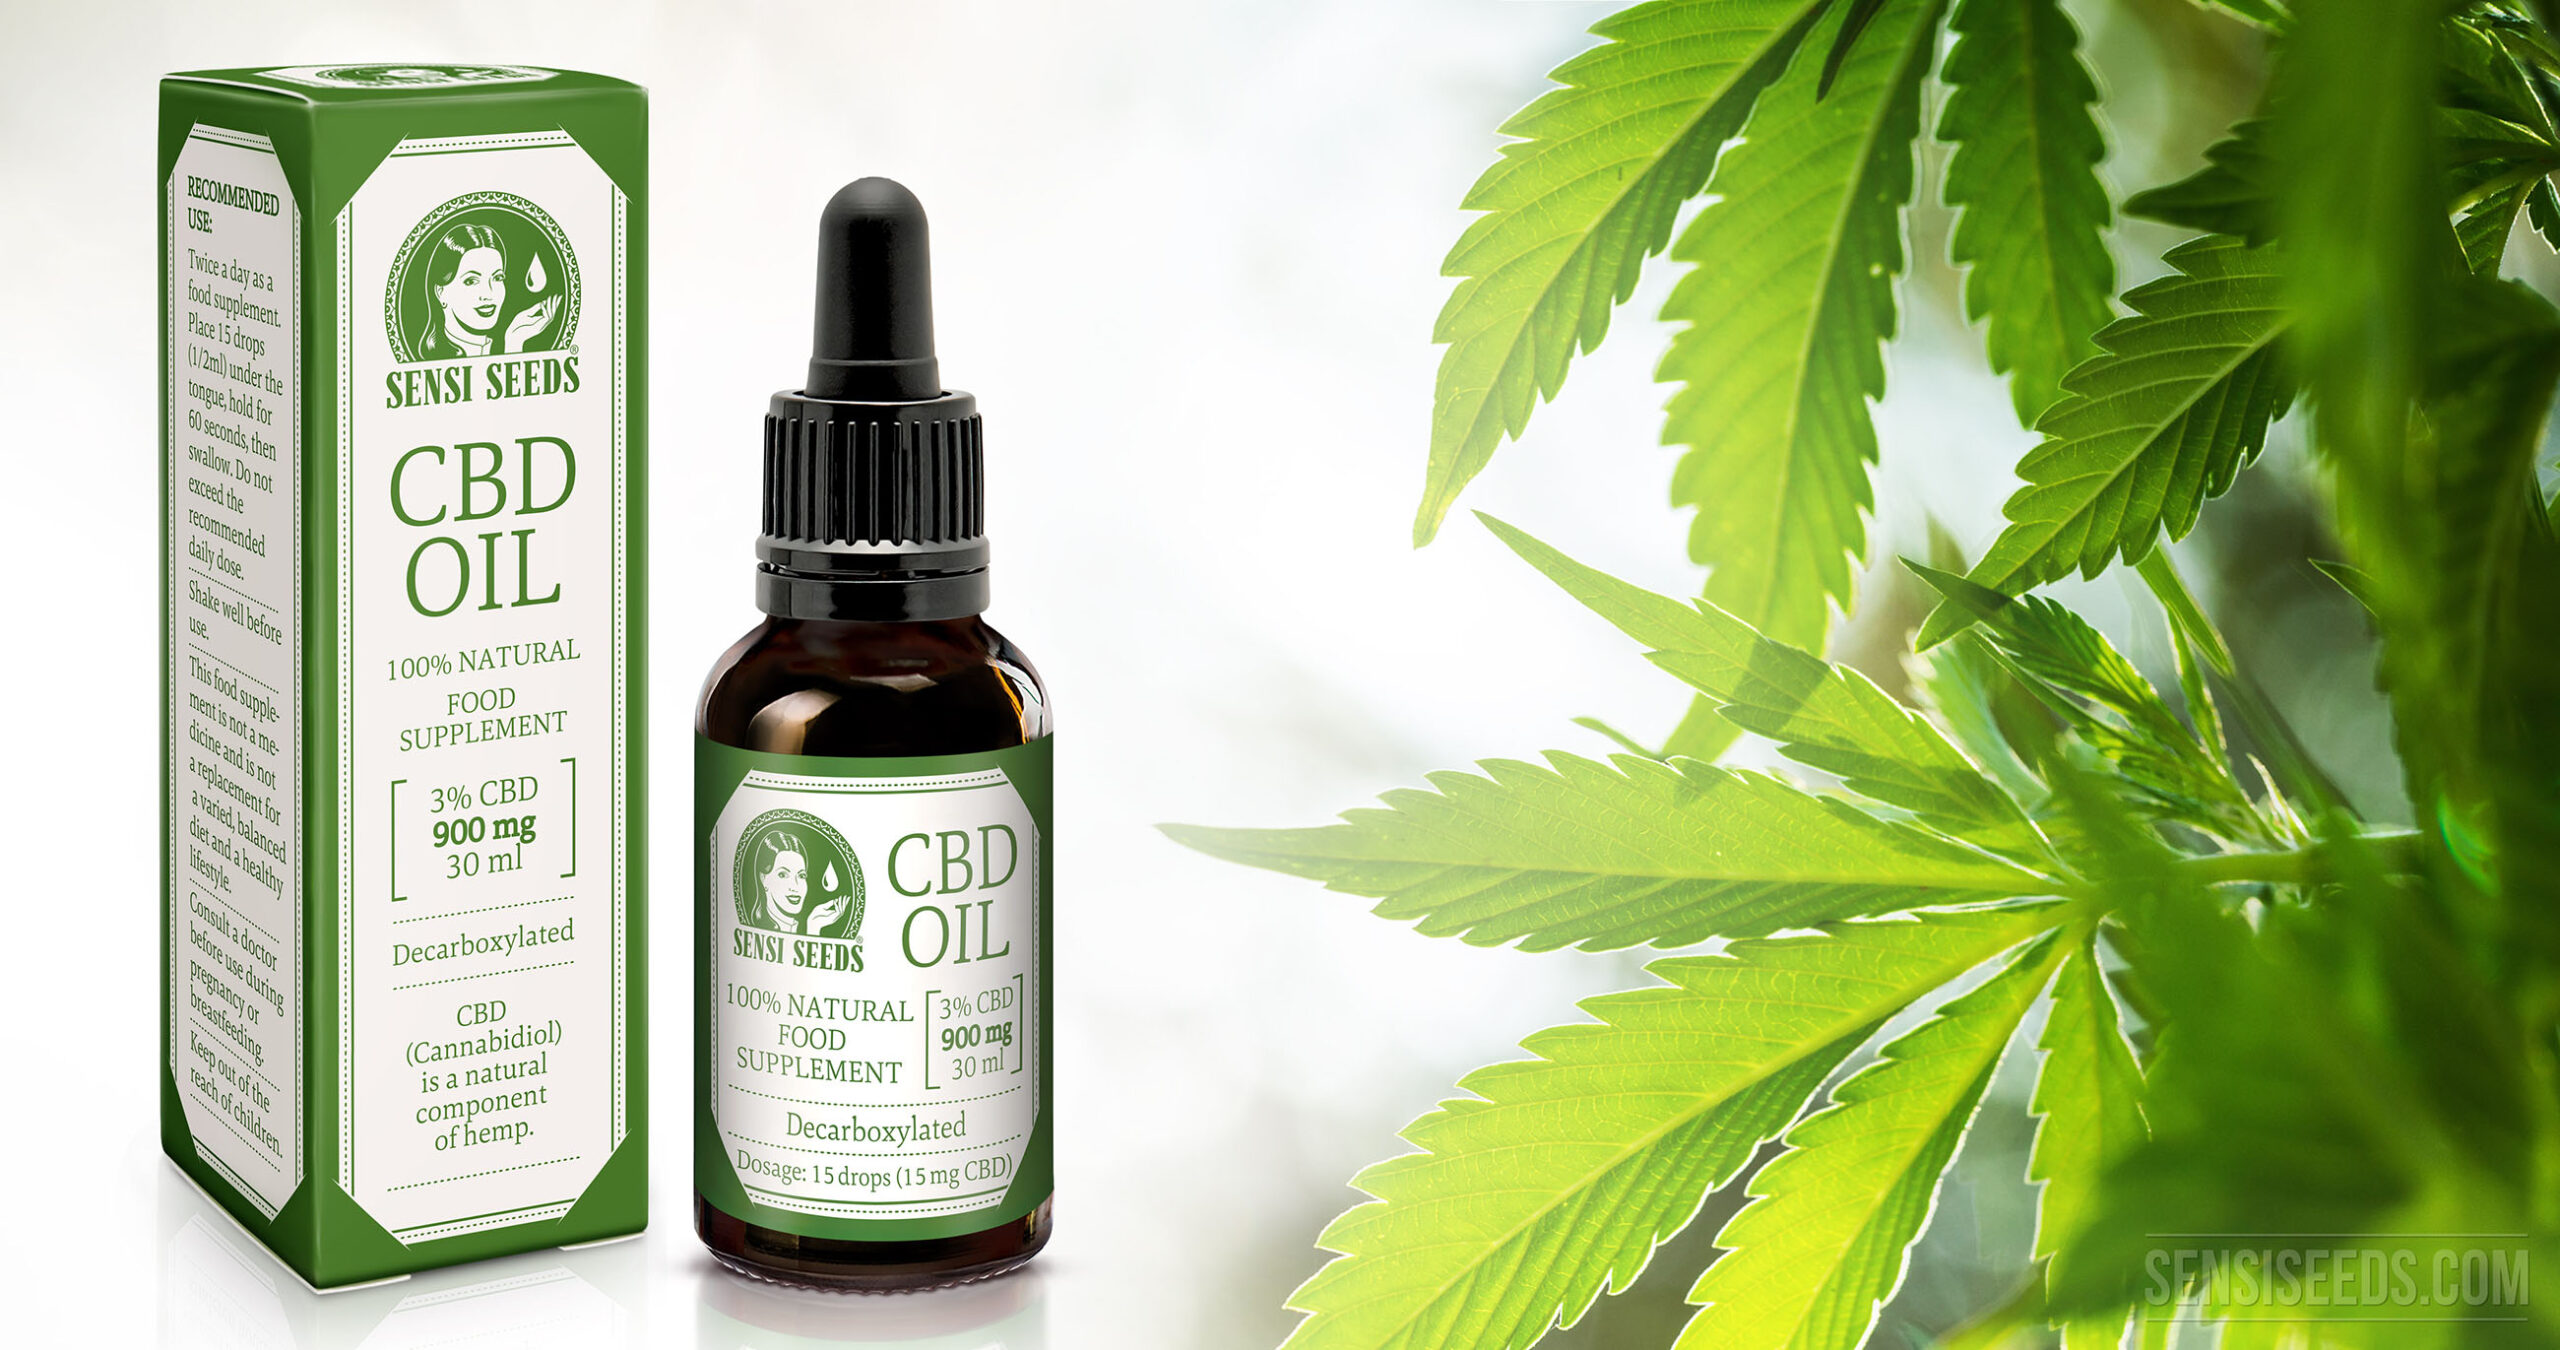 CAN YOU USE CBD OIL TOPICALLY?